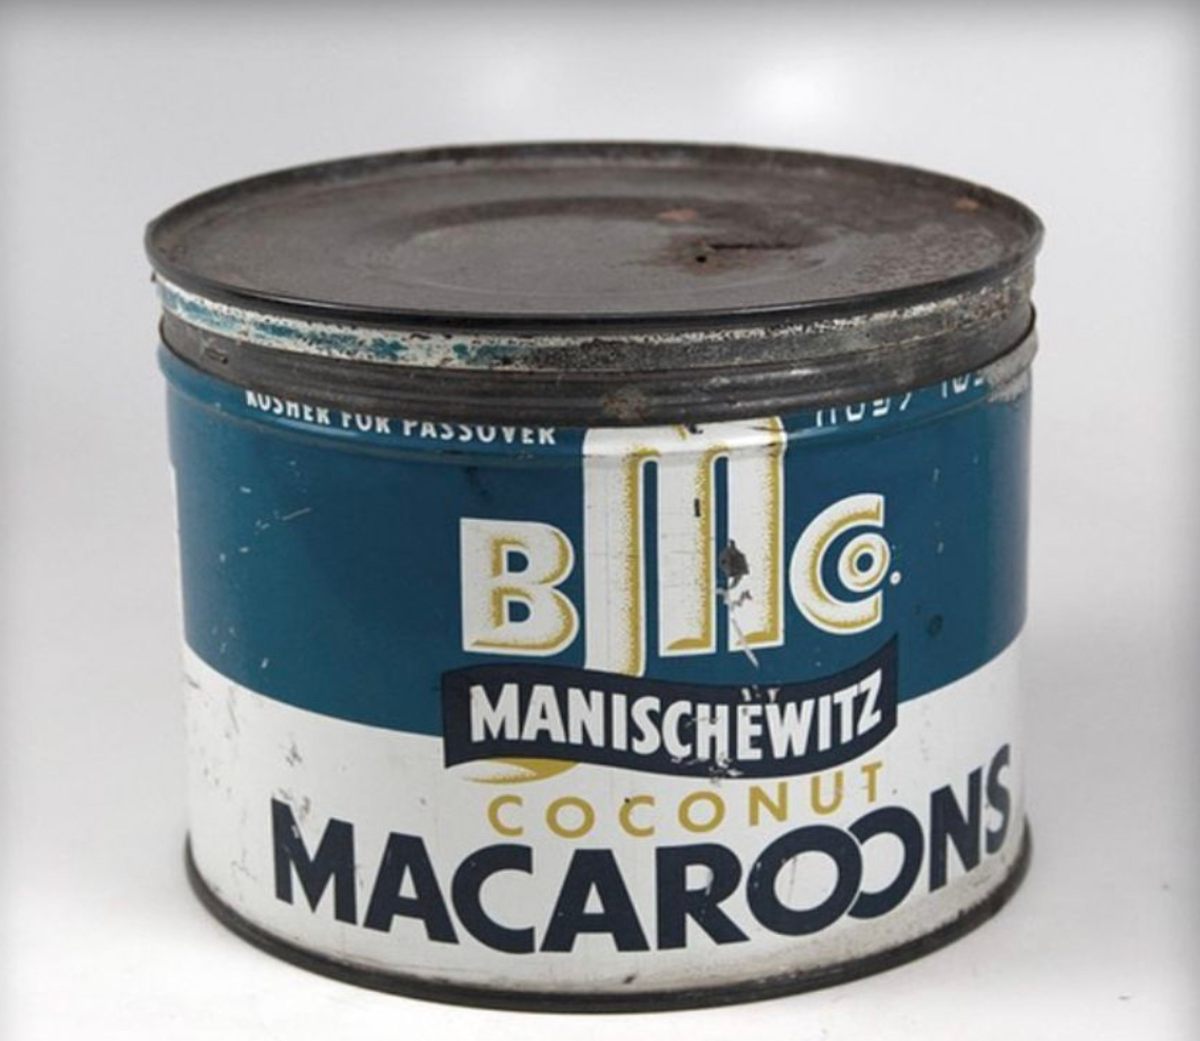 A vintage canister of Manischewitz coconut macaroons.